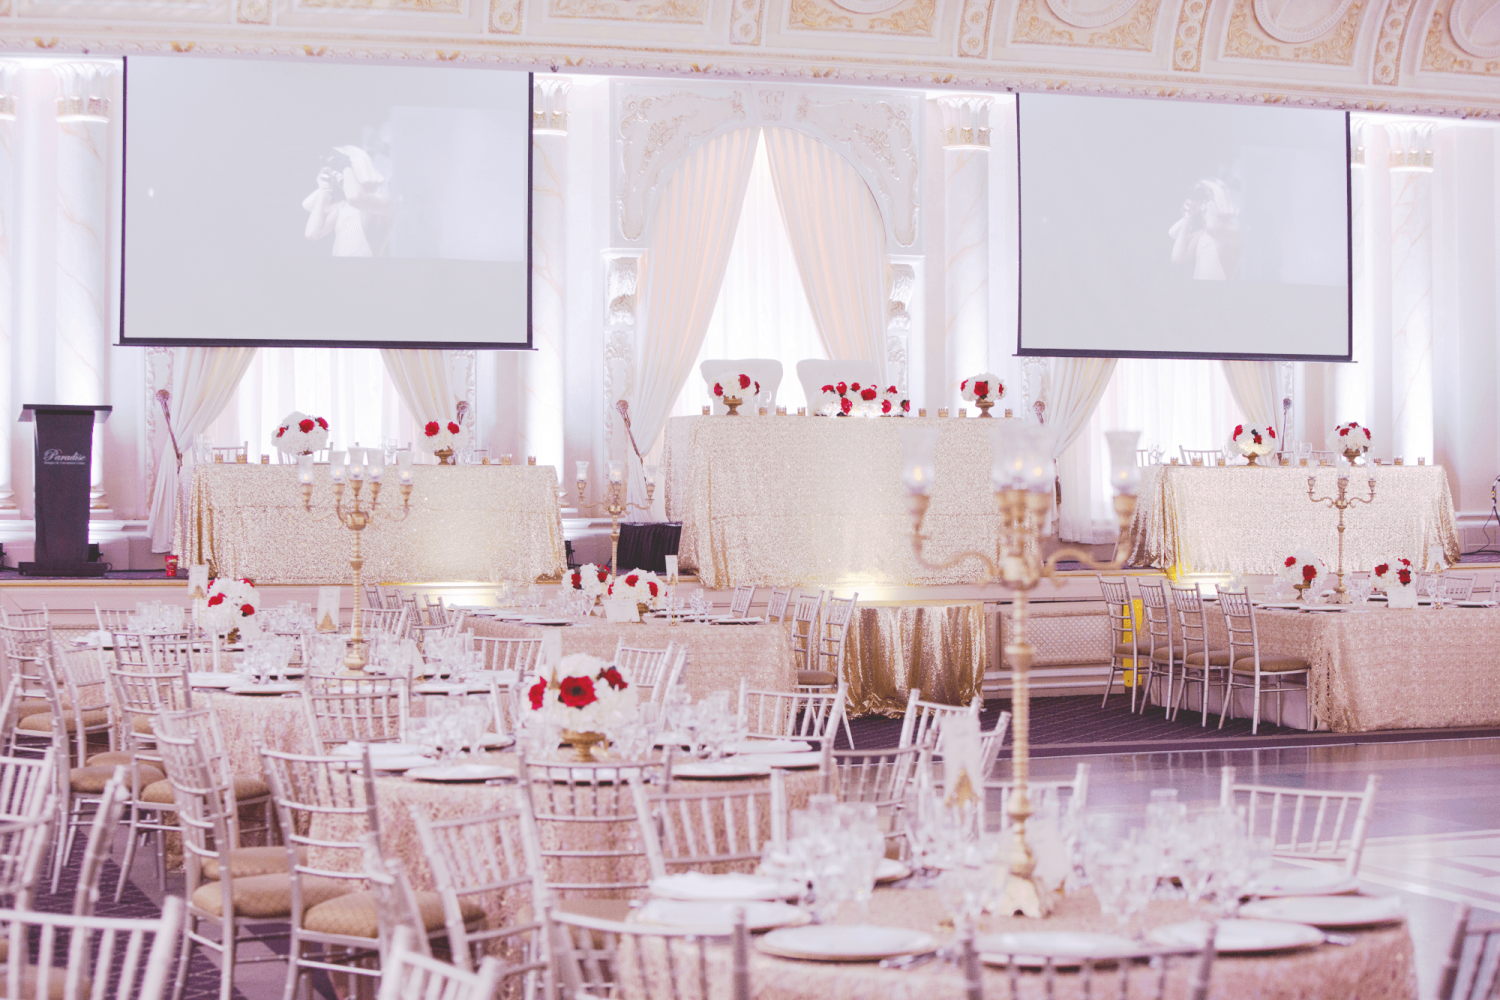 The Queen Mary Ballroom venue at Paradise Banquet Halls with a dance floor, circular tables with chairs, and a raised head table with a red and white flower colour scheme.